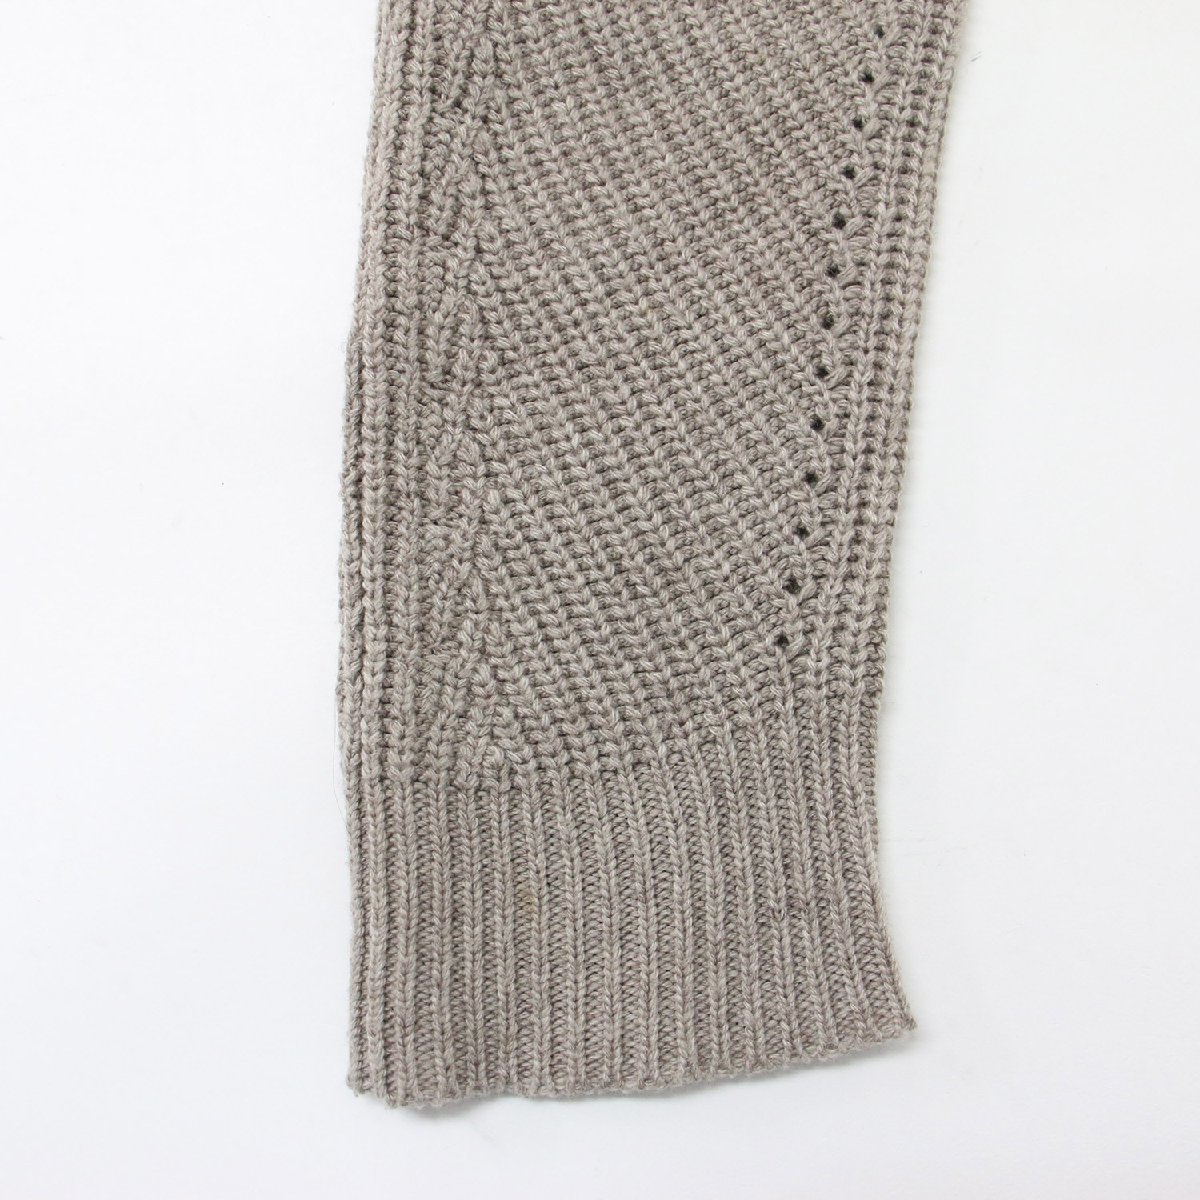 FLORENT Florent knitted sweater beige size : FREE pull over crew neck long sleeve . braided low gauge oversize 